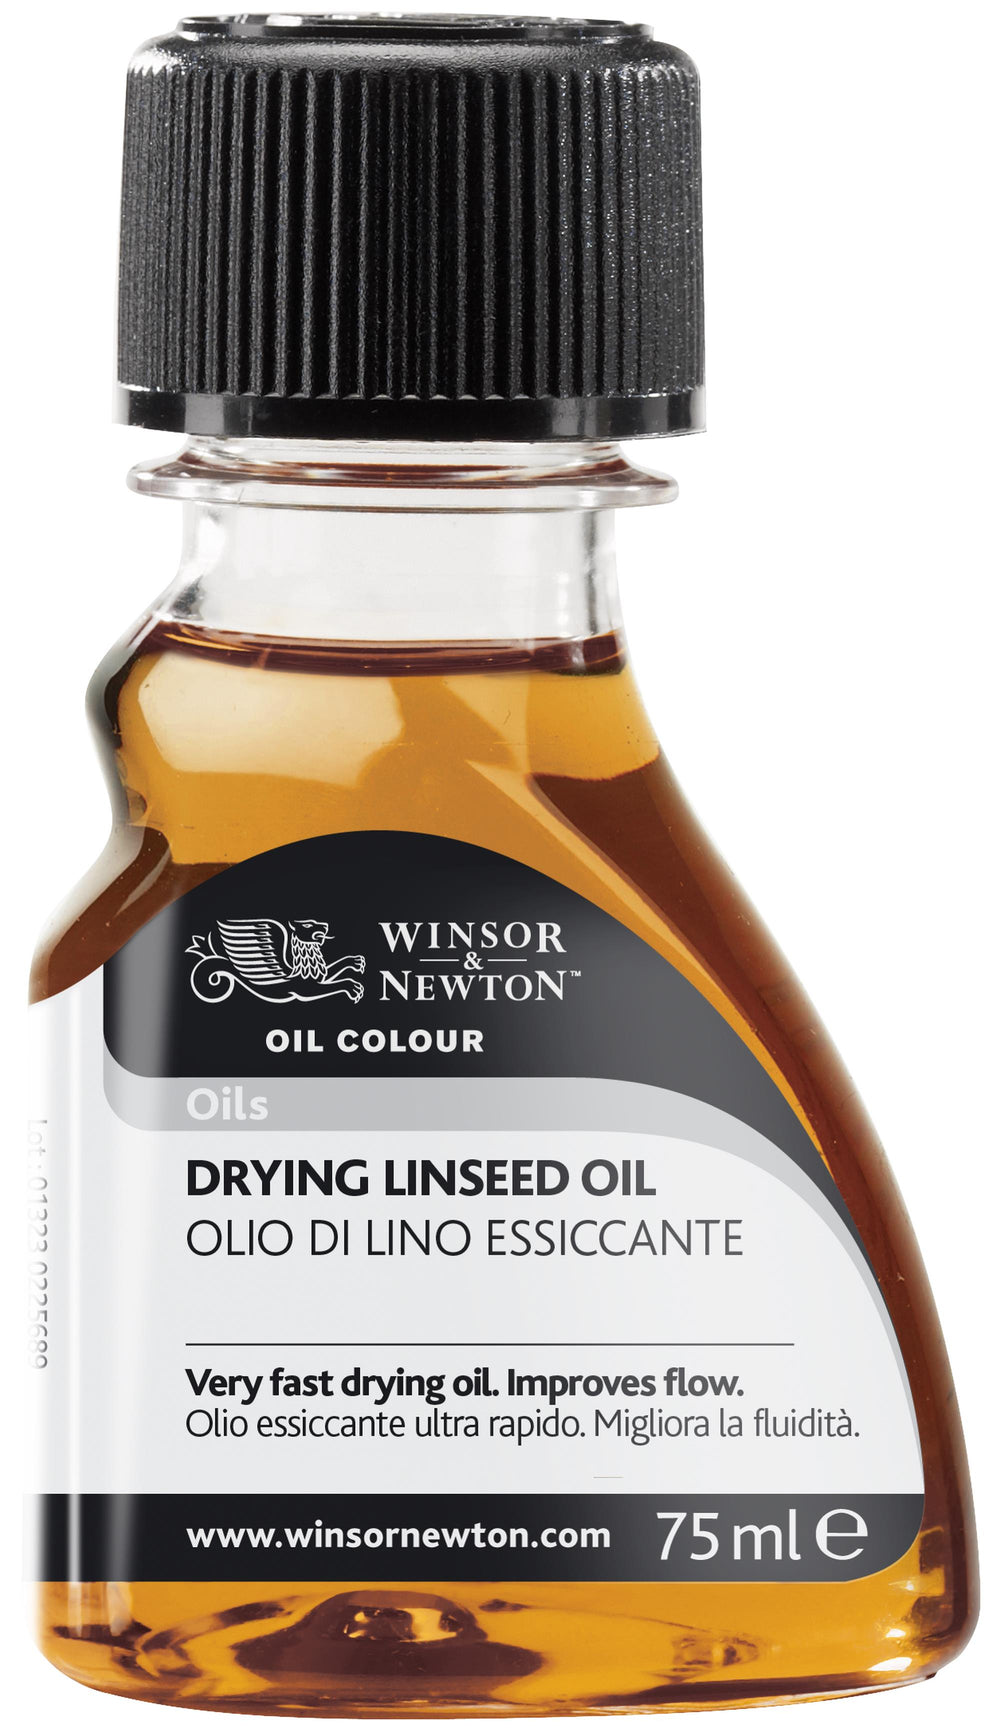 Winsor & Newton Drying Linseed Oil - 75ml